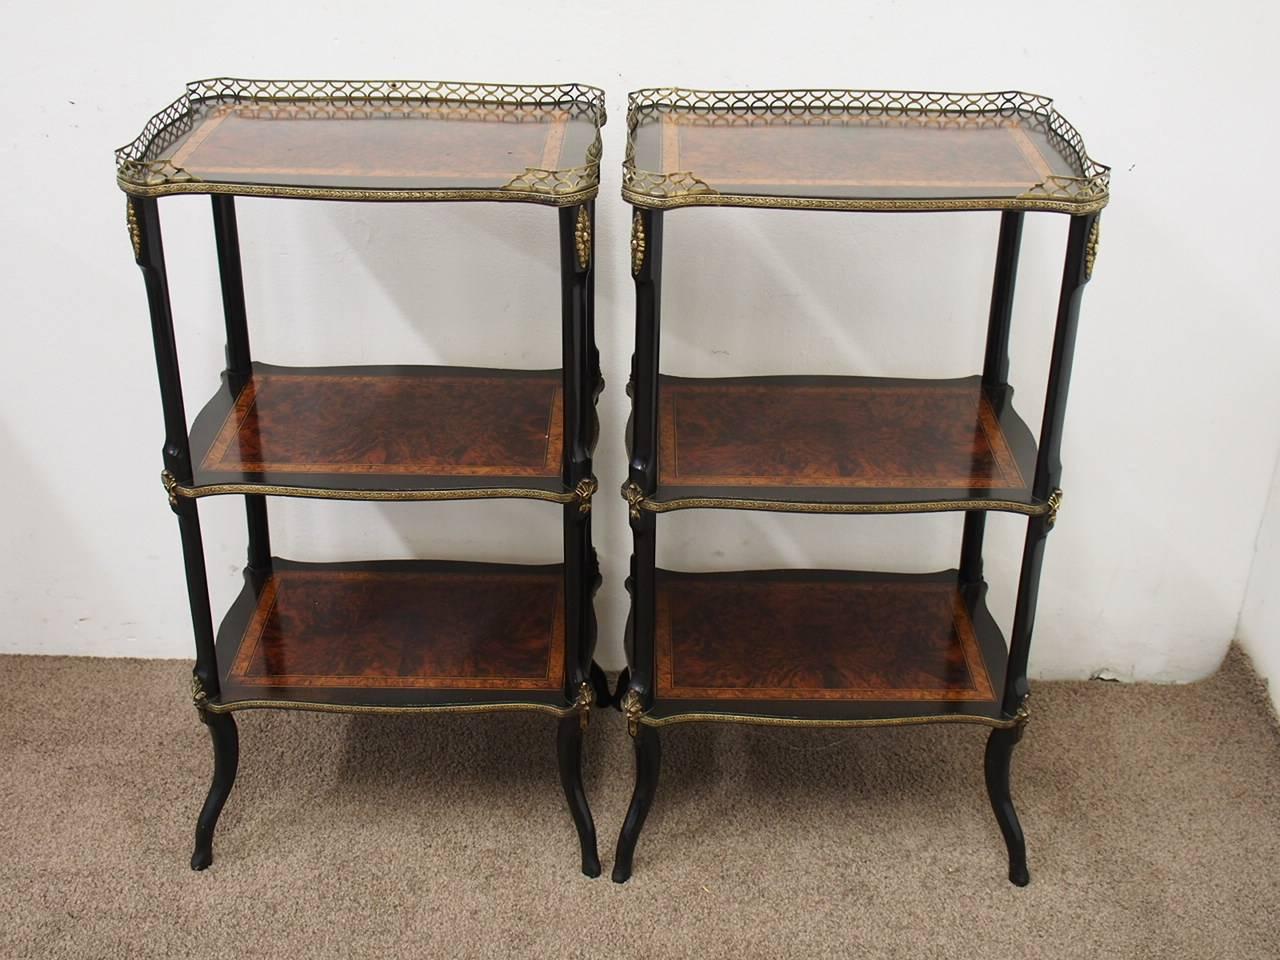 Pair of French Victorian Amboyna, Boxwood and Ebony Etageres, circa 1880 For Sale 8